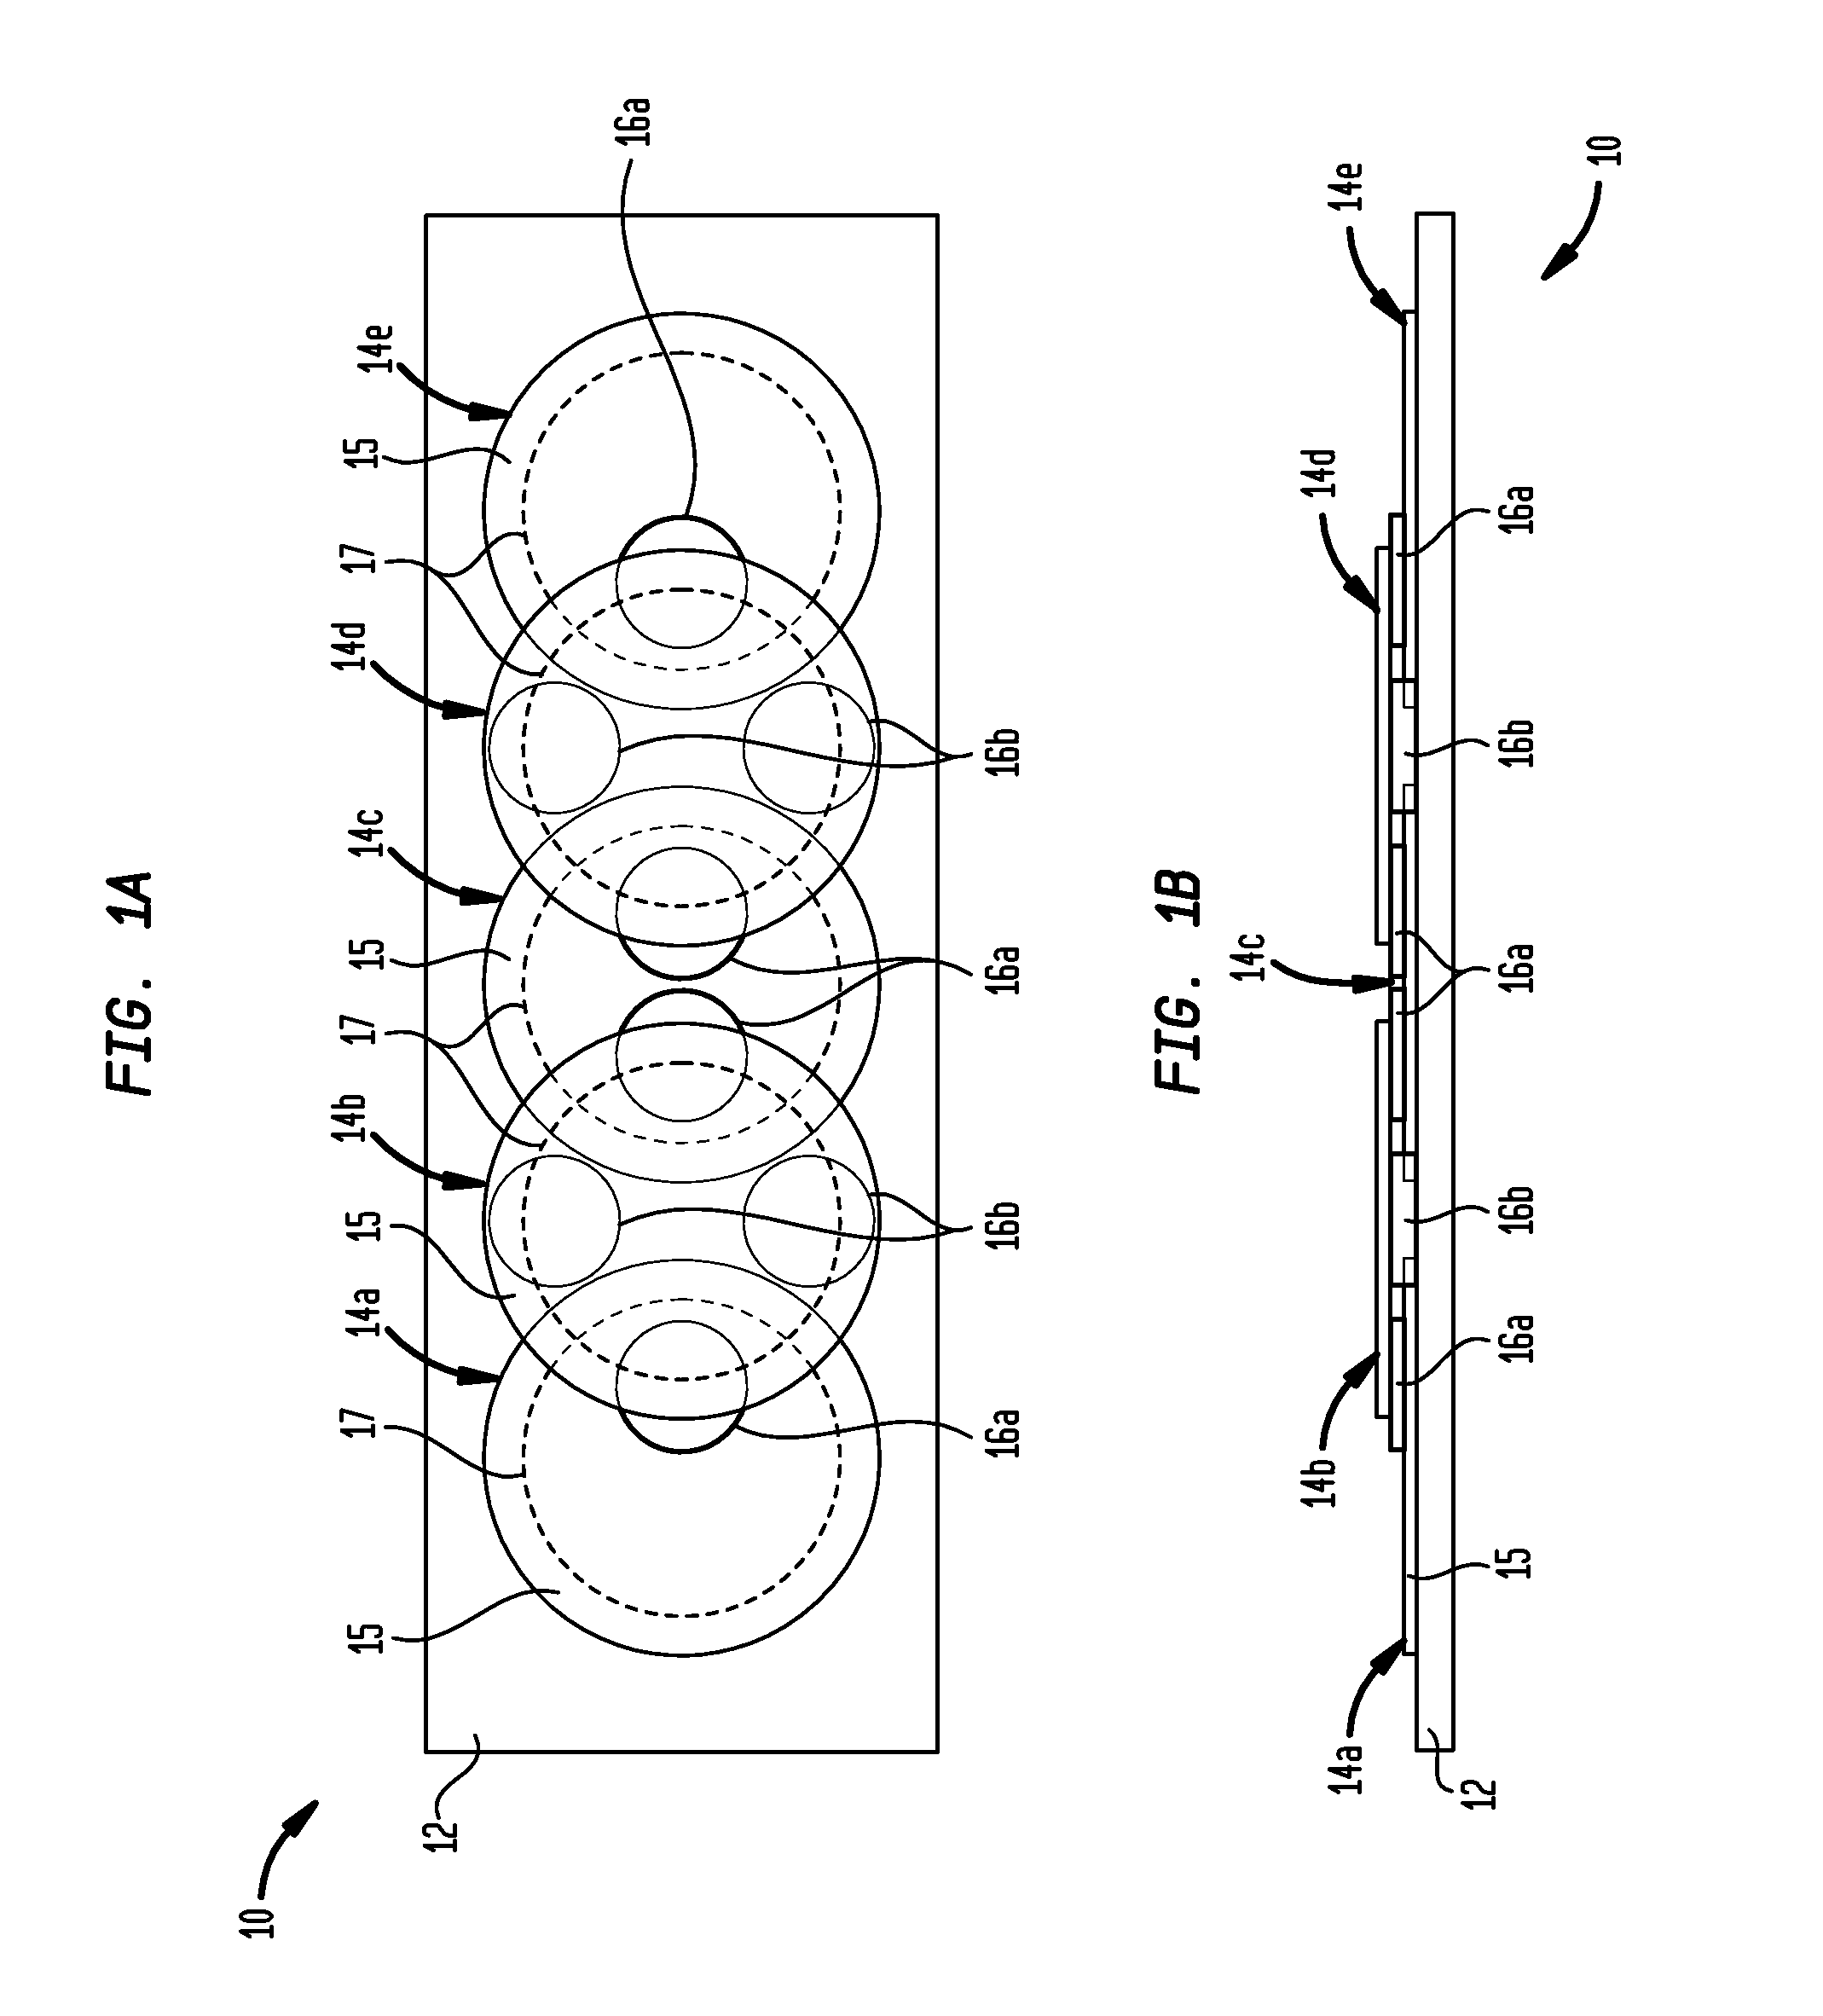 Superconductor RF coil array